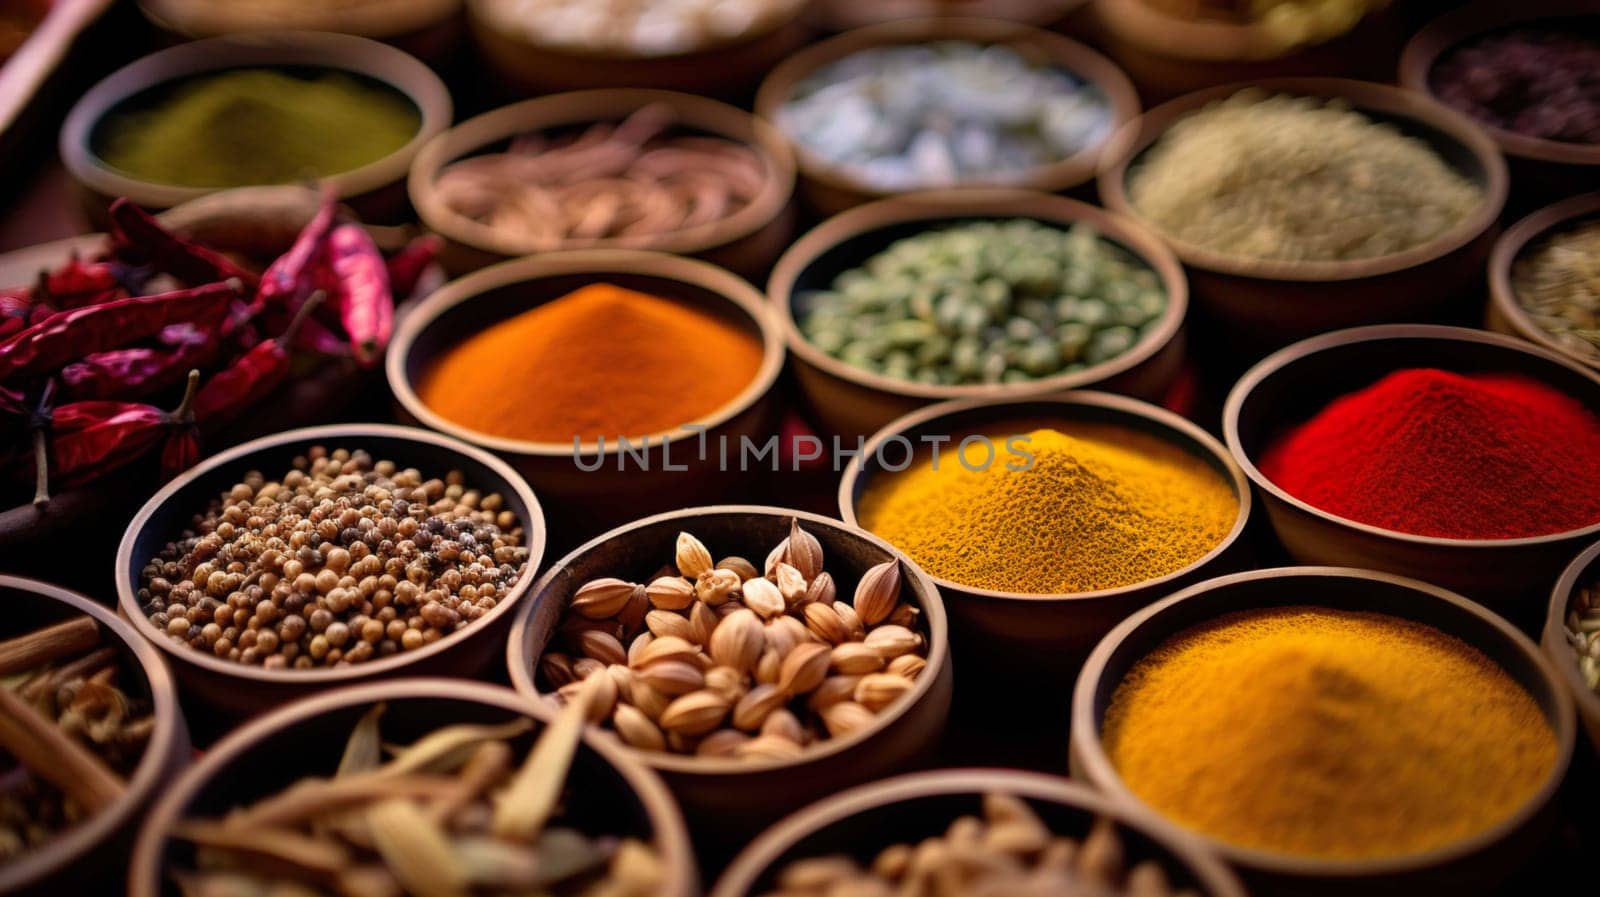   Colorful background of various herbs and spices for cooking in bowls, Spices - Seasonings, Food   India, Indian culture, Raw materials for banner design , Generate AI by Mrsongrphc